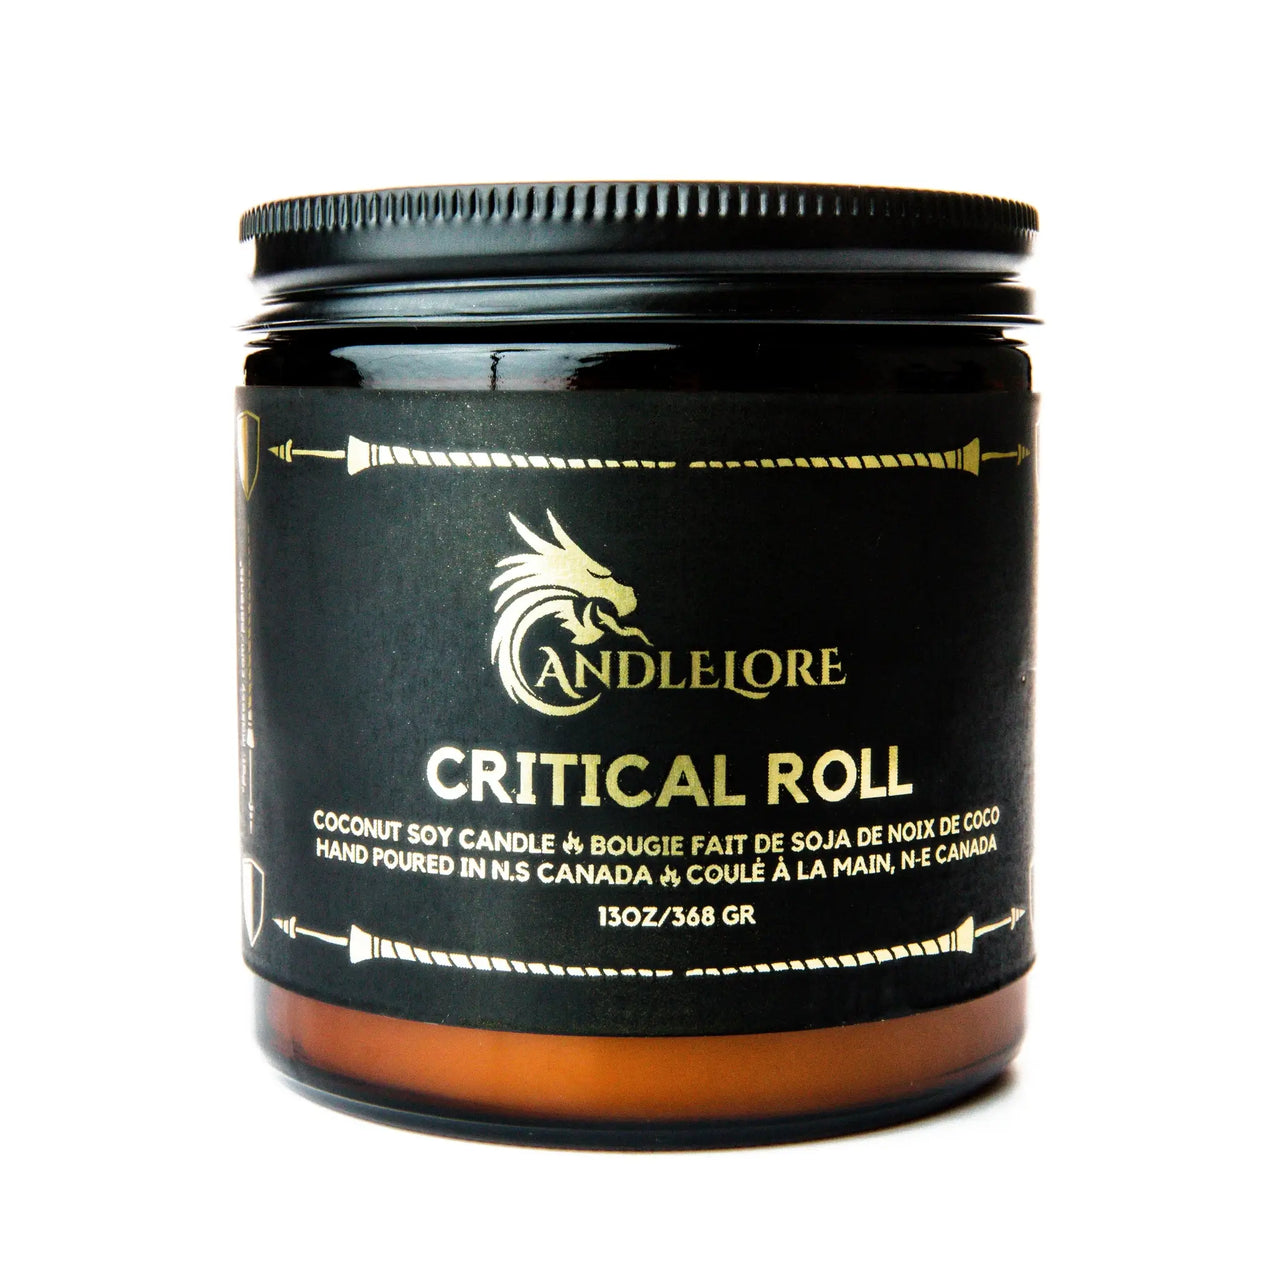 Large Crtical Roll Candle 